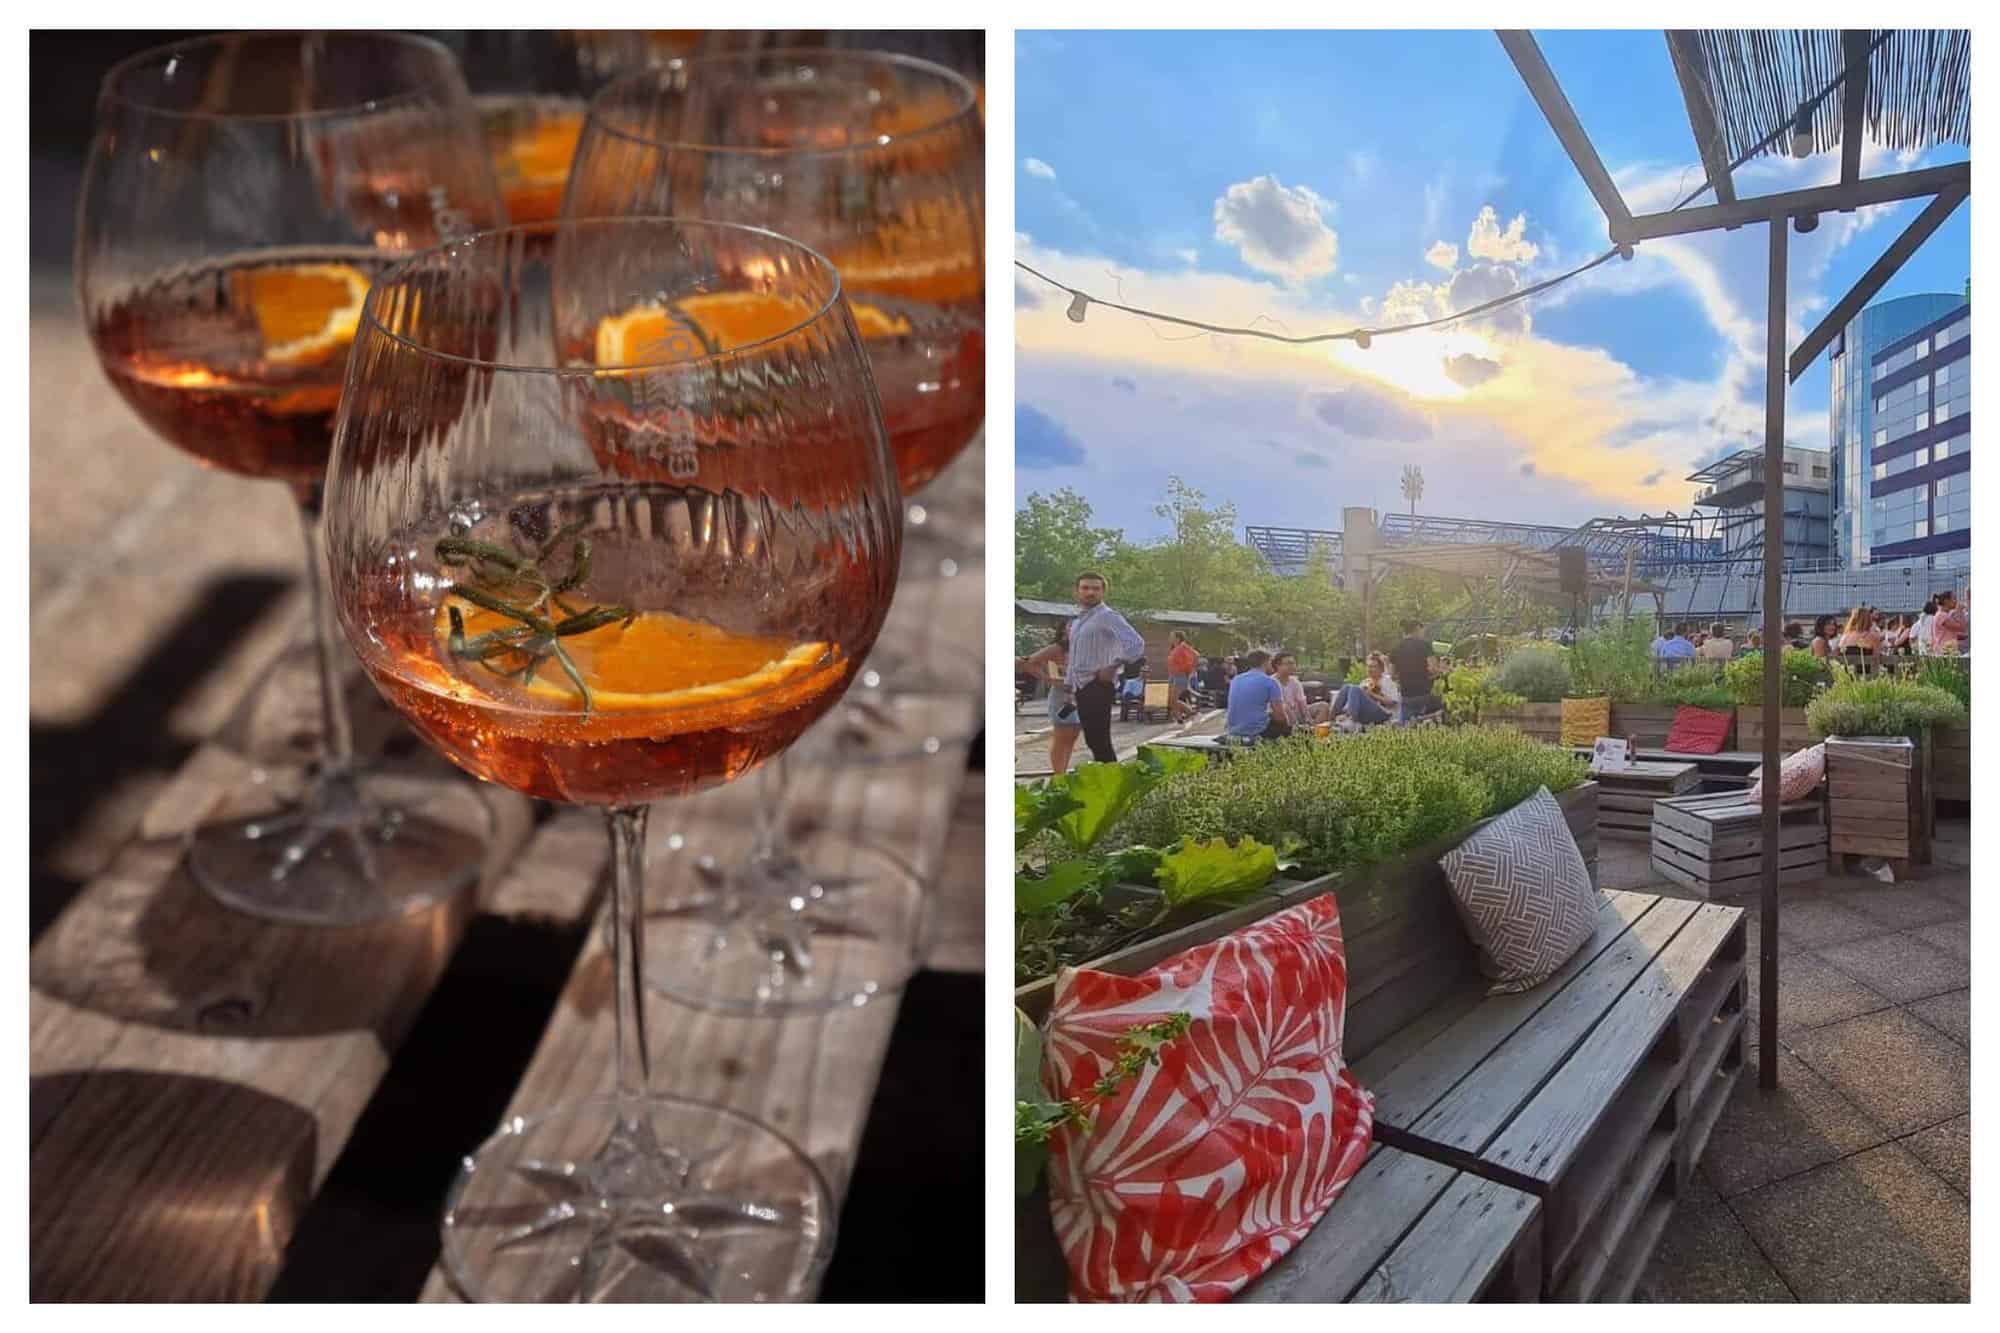 Three wine glasses with Pimms served with orange and rosemary. Light breaks through on a cloudy day at the busy terrace of Le Papa Cabane.